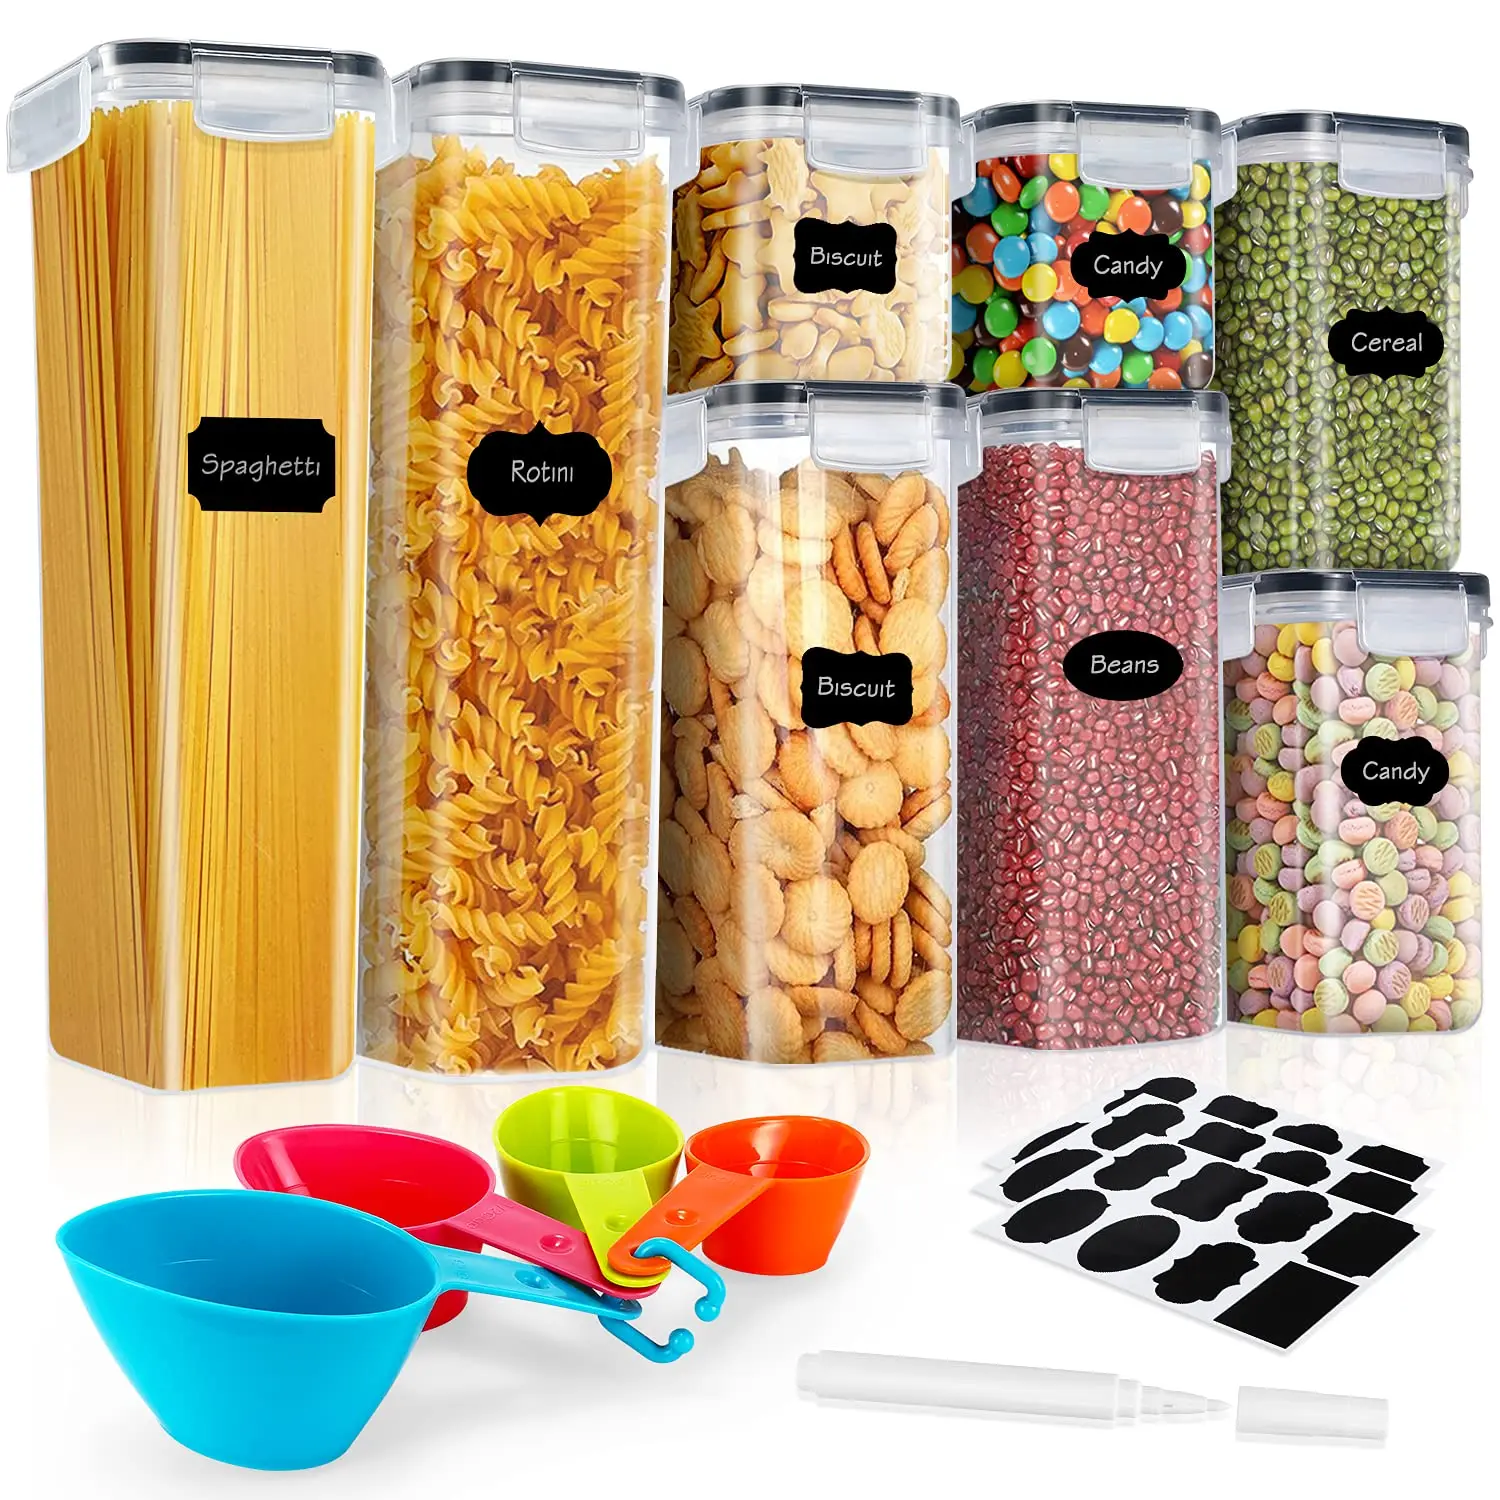 https://ae01.alicdn.com/kf/S03036846847a464a9ad7af9c0ef22eafa/8-Pcs-High-Quality-Kitchen-Food-Container-Large-Food-Storage-Containers-Noodle-Box-Kitchen-Organizer-Multigrain.jpg